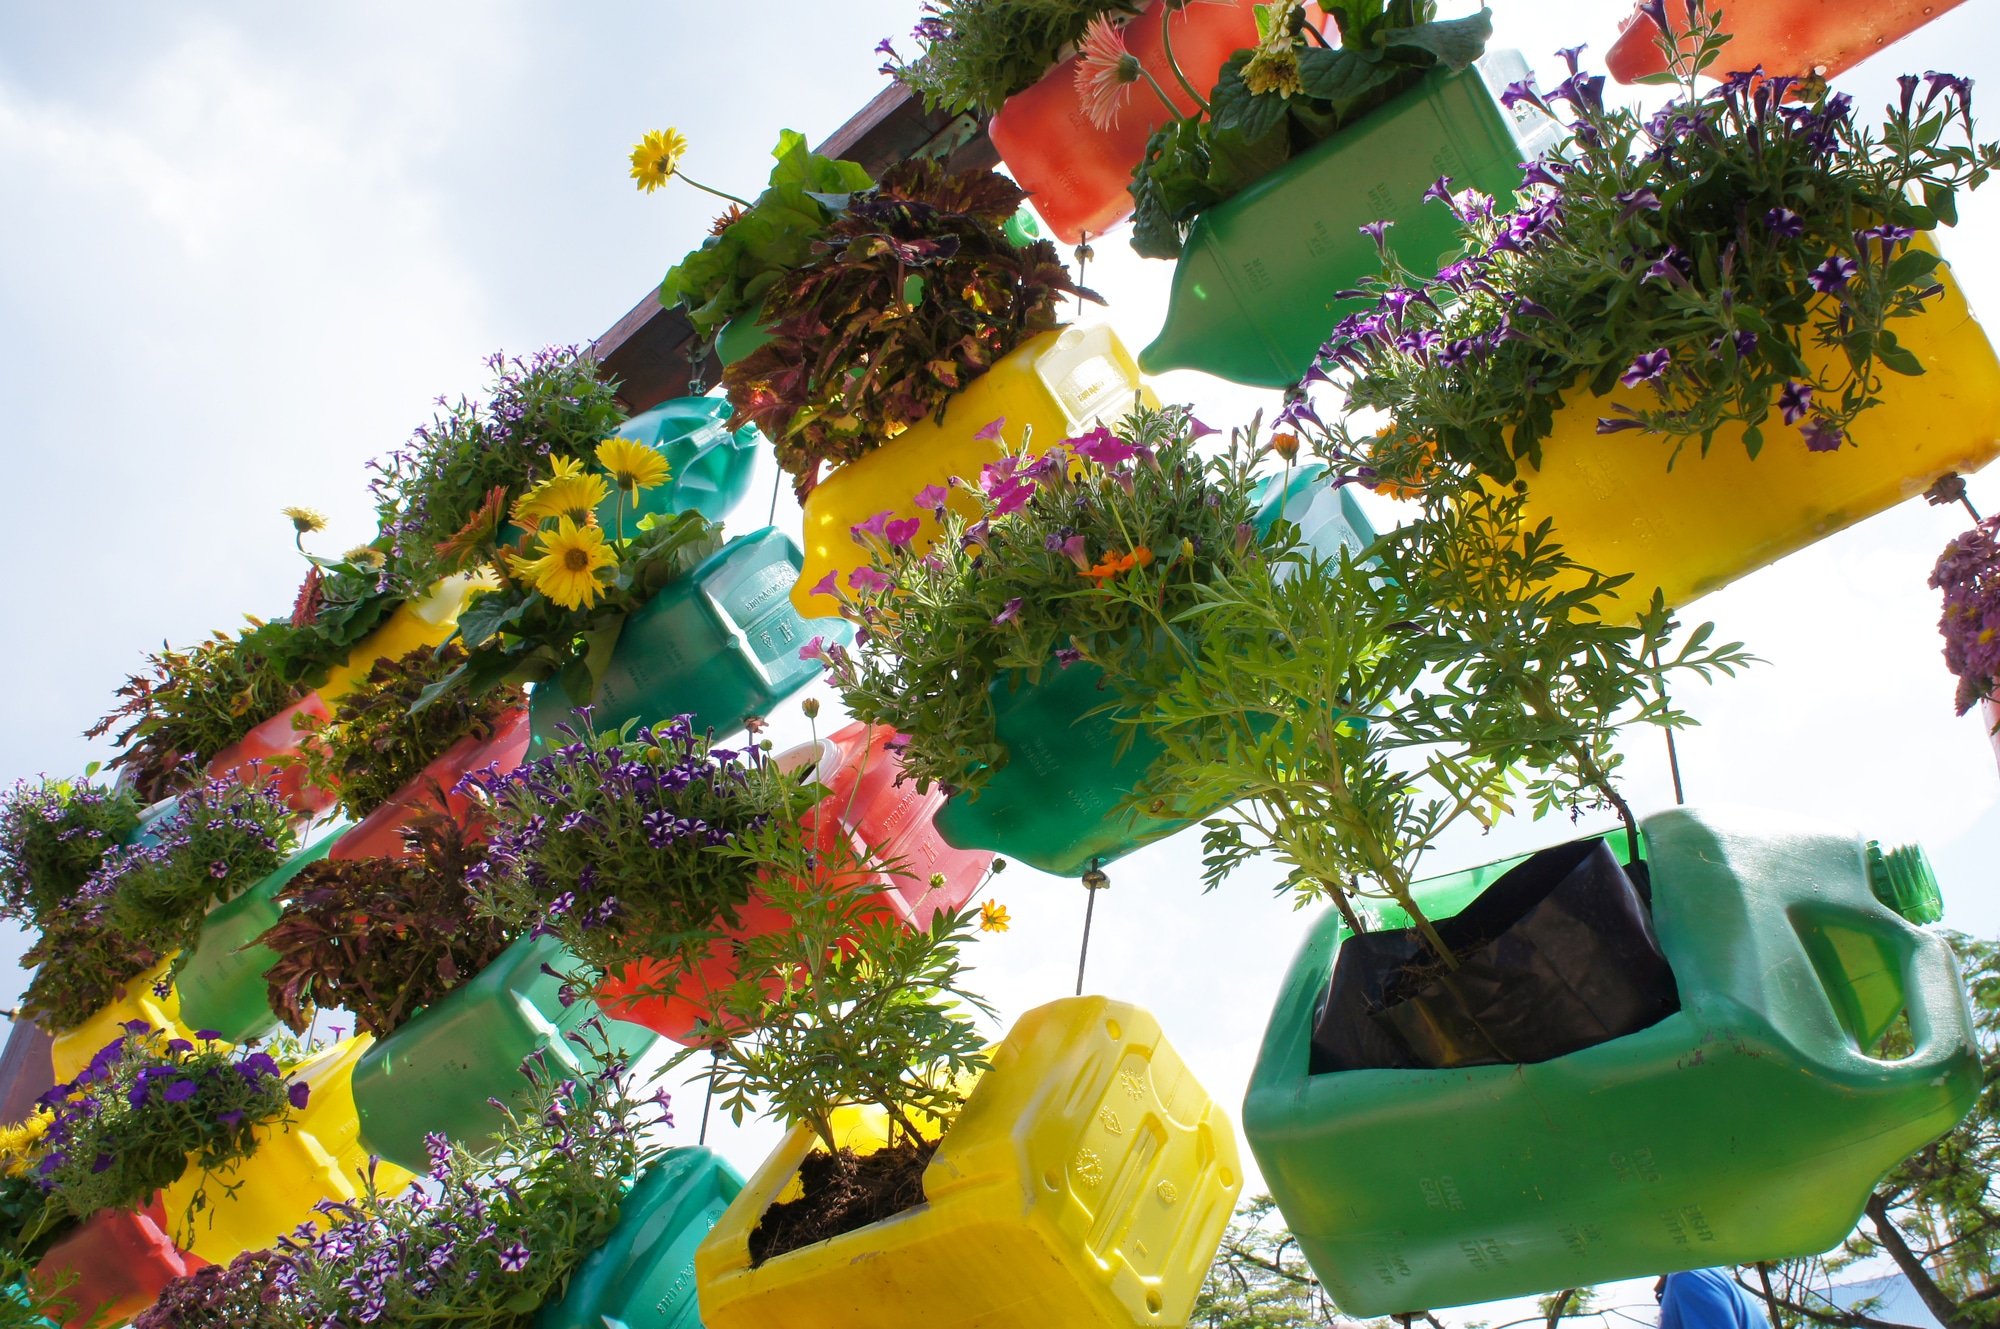 Colorful recycled bottles with hanging plants for landscaping garden